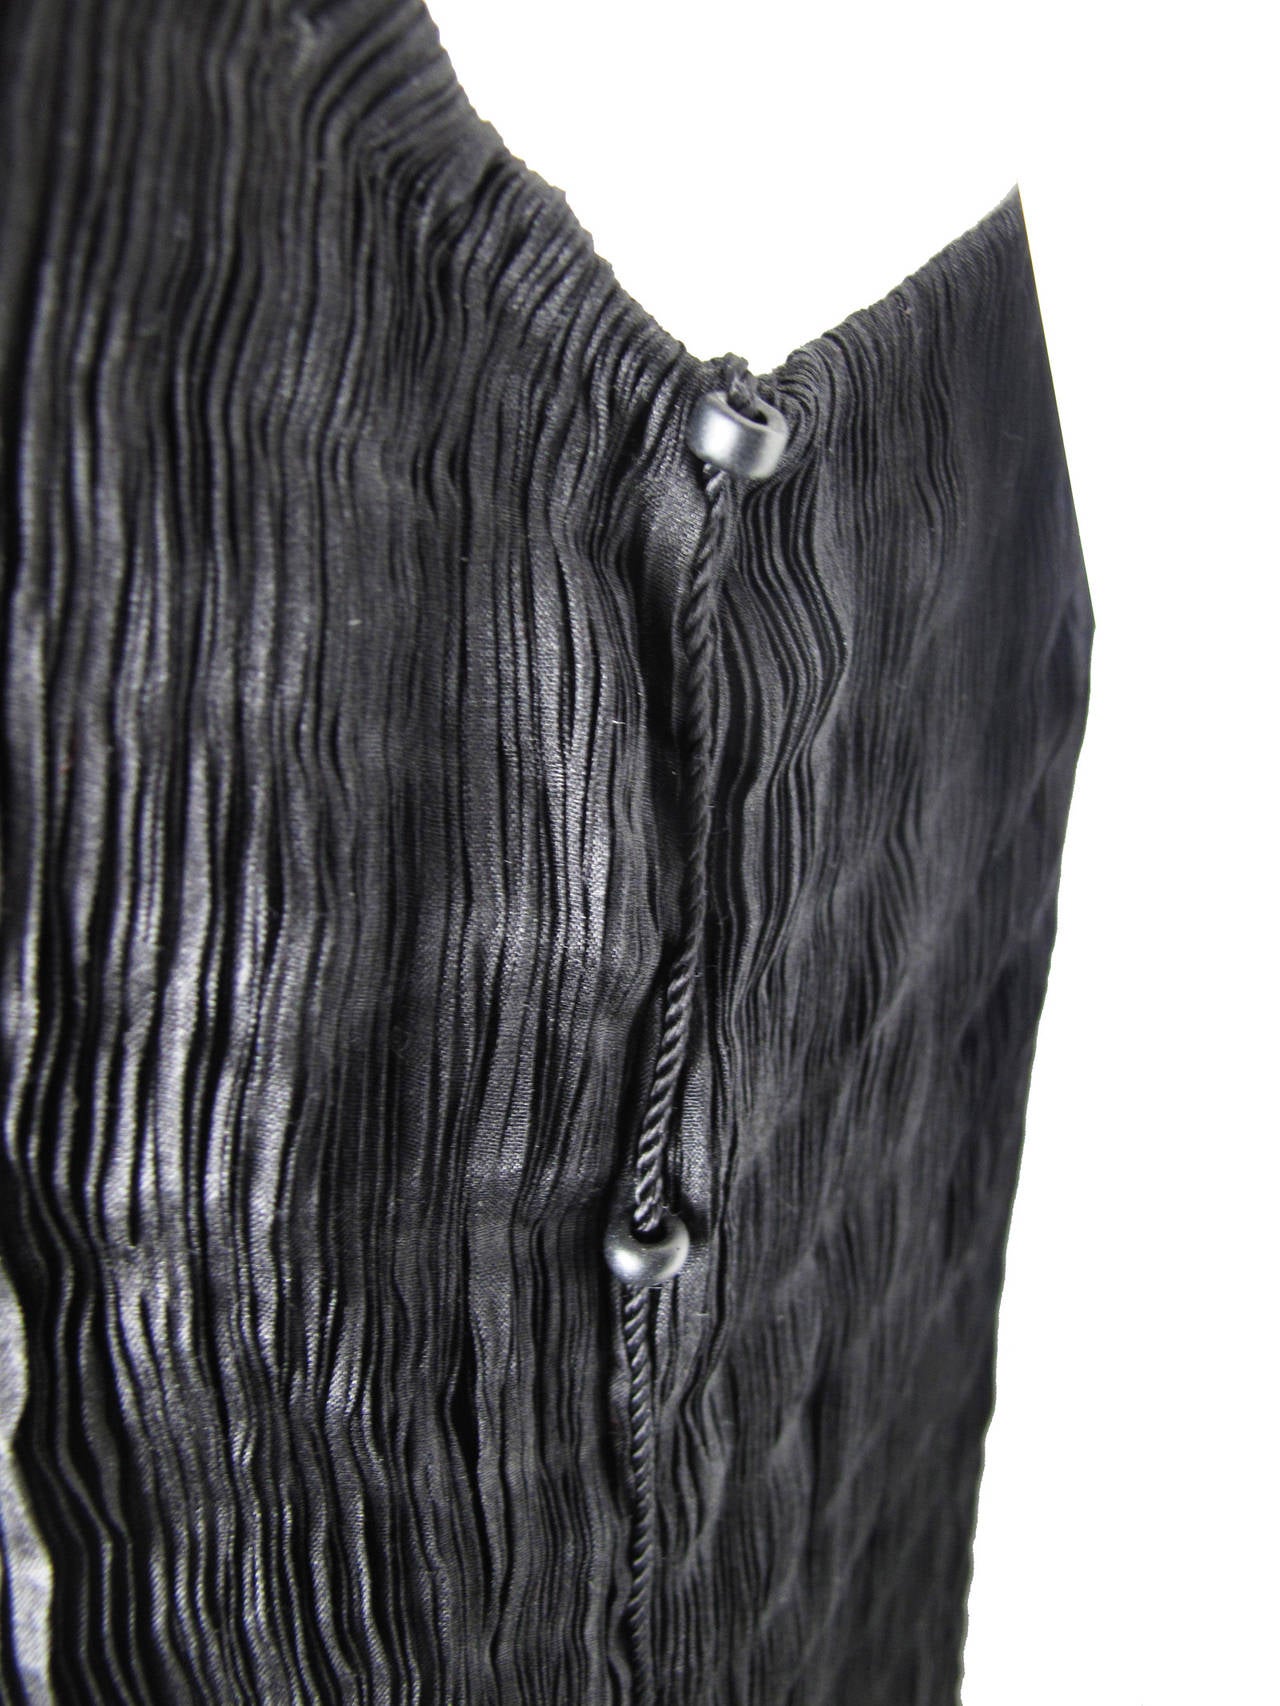 Fortuny pleated black tank dress made by Venetia Studium. Purchased in Italy, circa 1980s. Condition: Excellent. 32